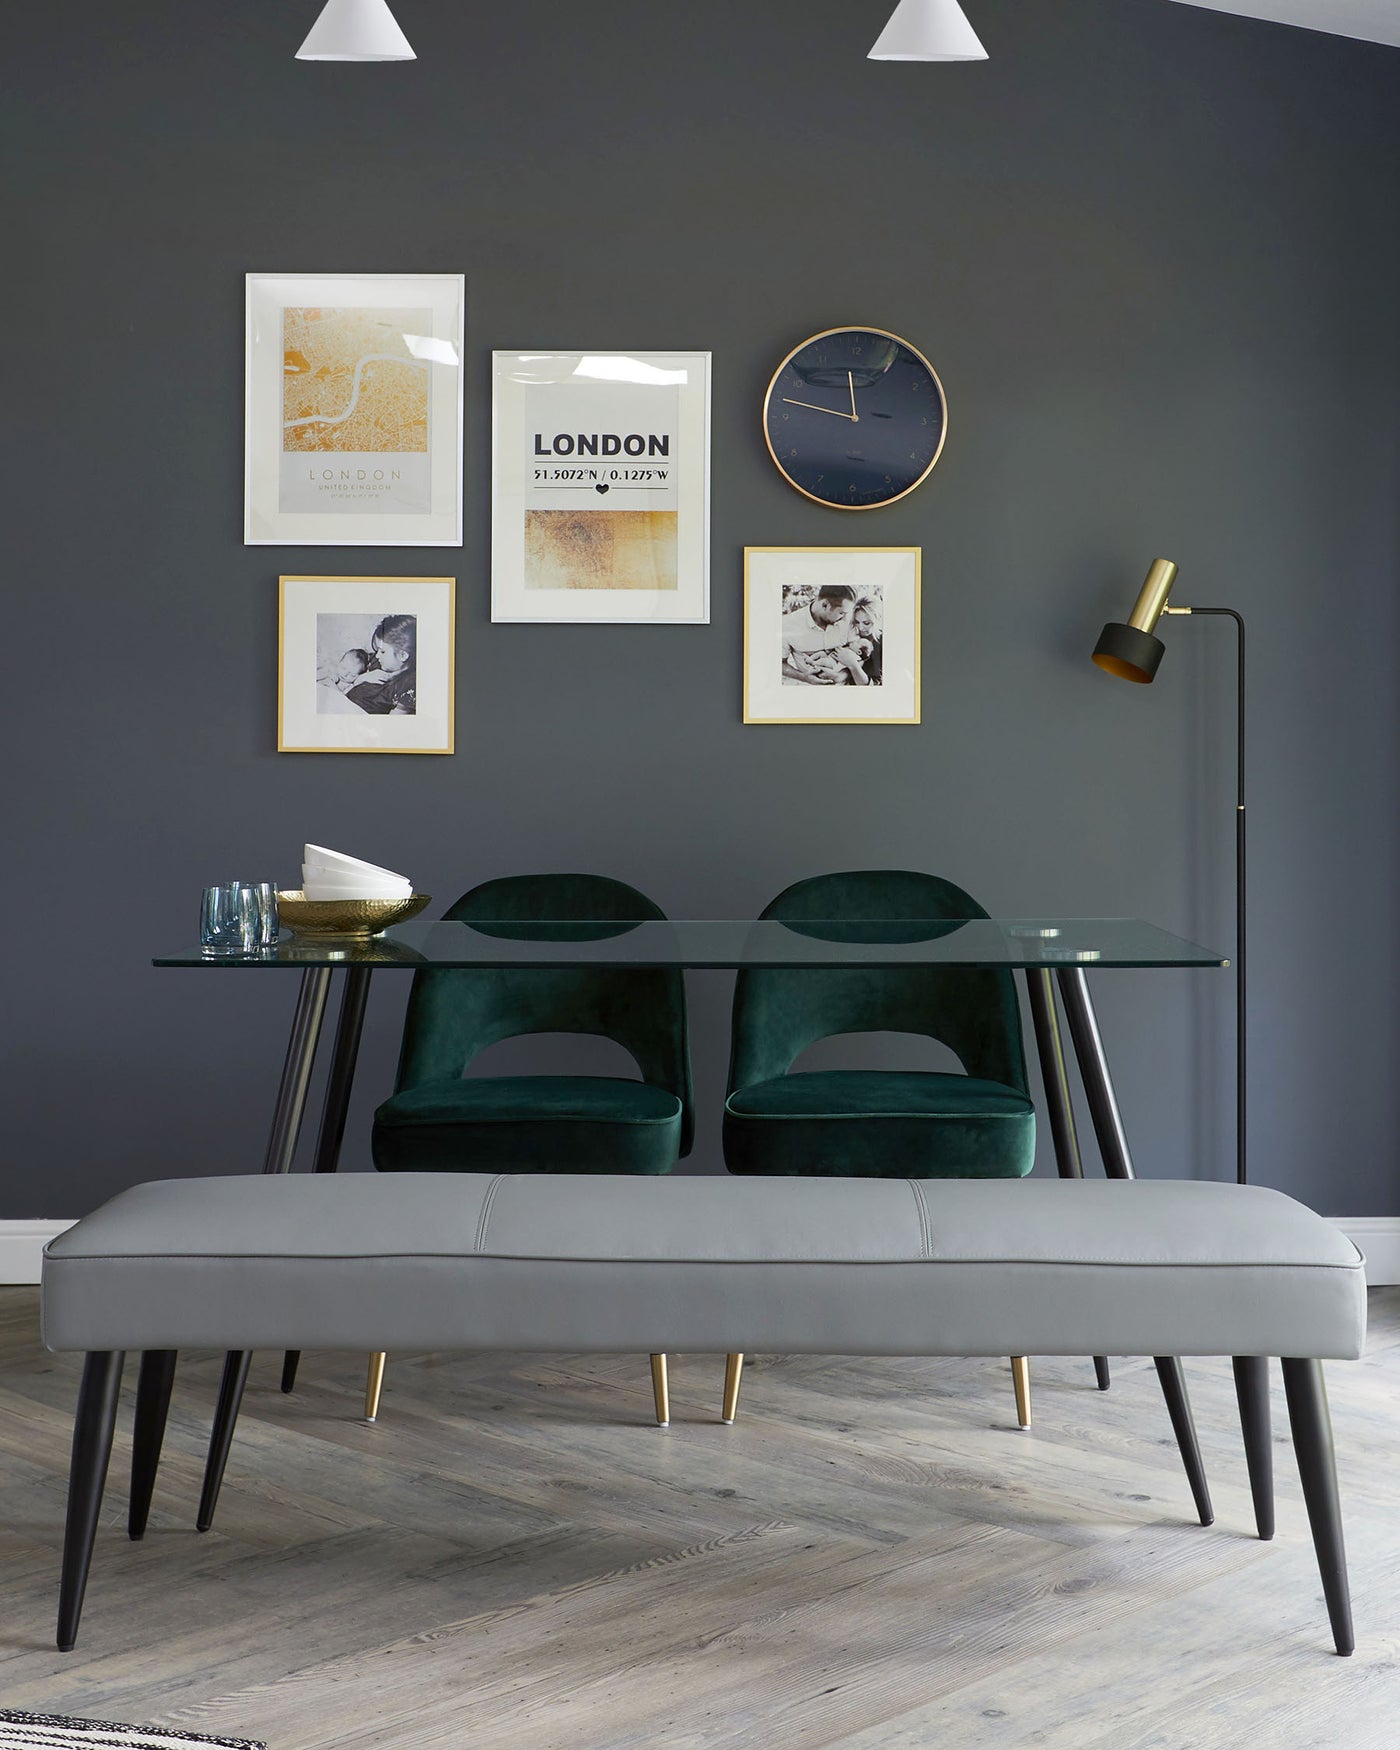 A modern dining set featuring a rectangular glass-topped table with black tapered legs, accompanied by four plush velvet green chairs. A sleek grey upholstered bench with black legs and gold feet accents sits to the forefront.